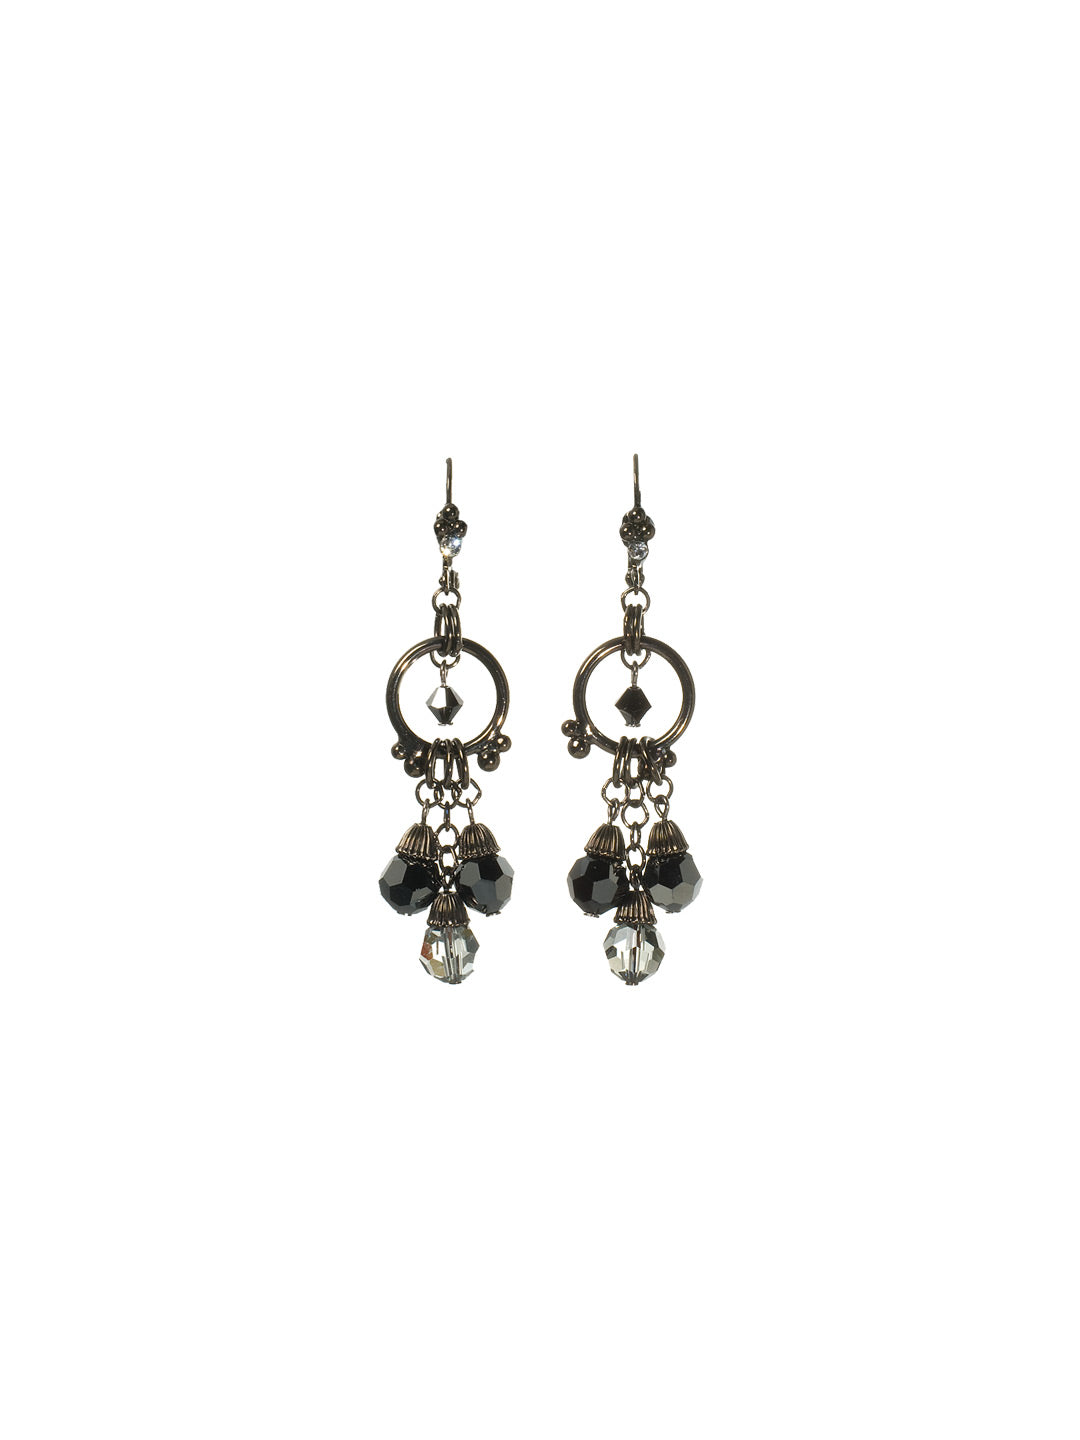 Floating Chandelier Earring - ECC3GMMMO -  From Sorrelli's Midnight Moon collection in our Gun Metal finish.